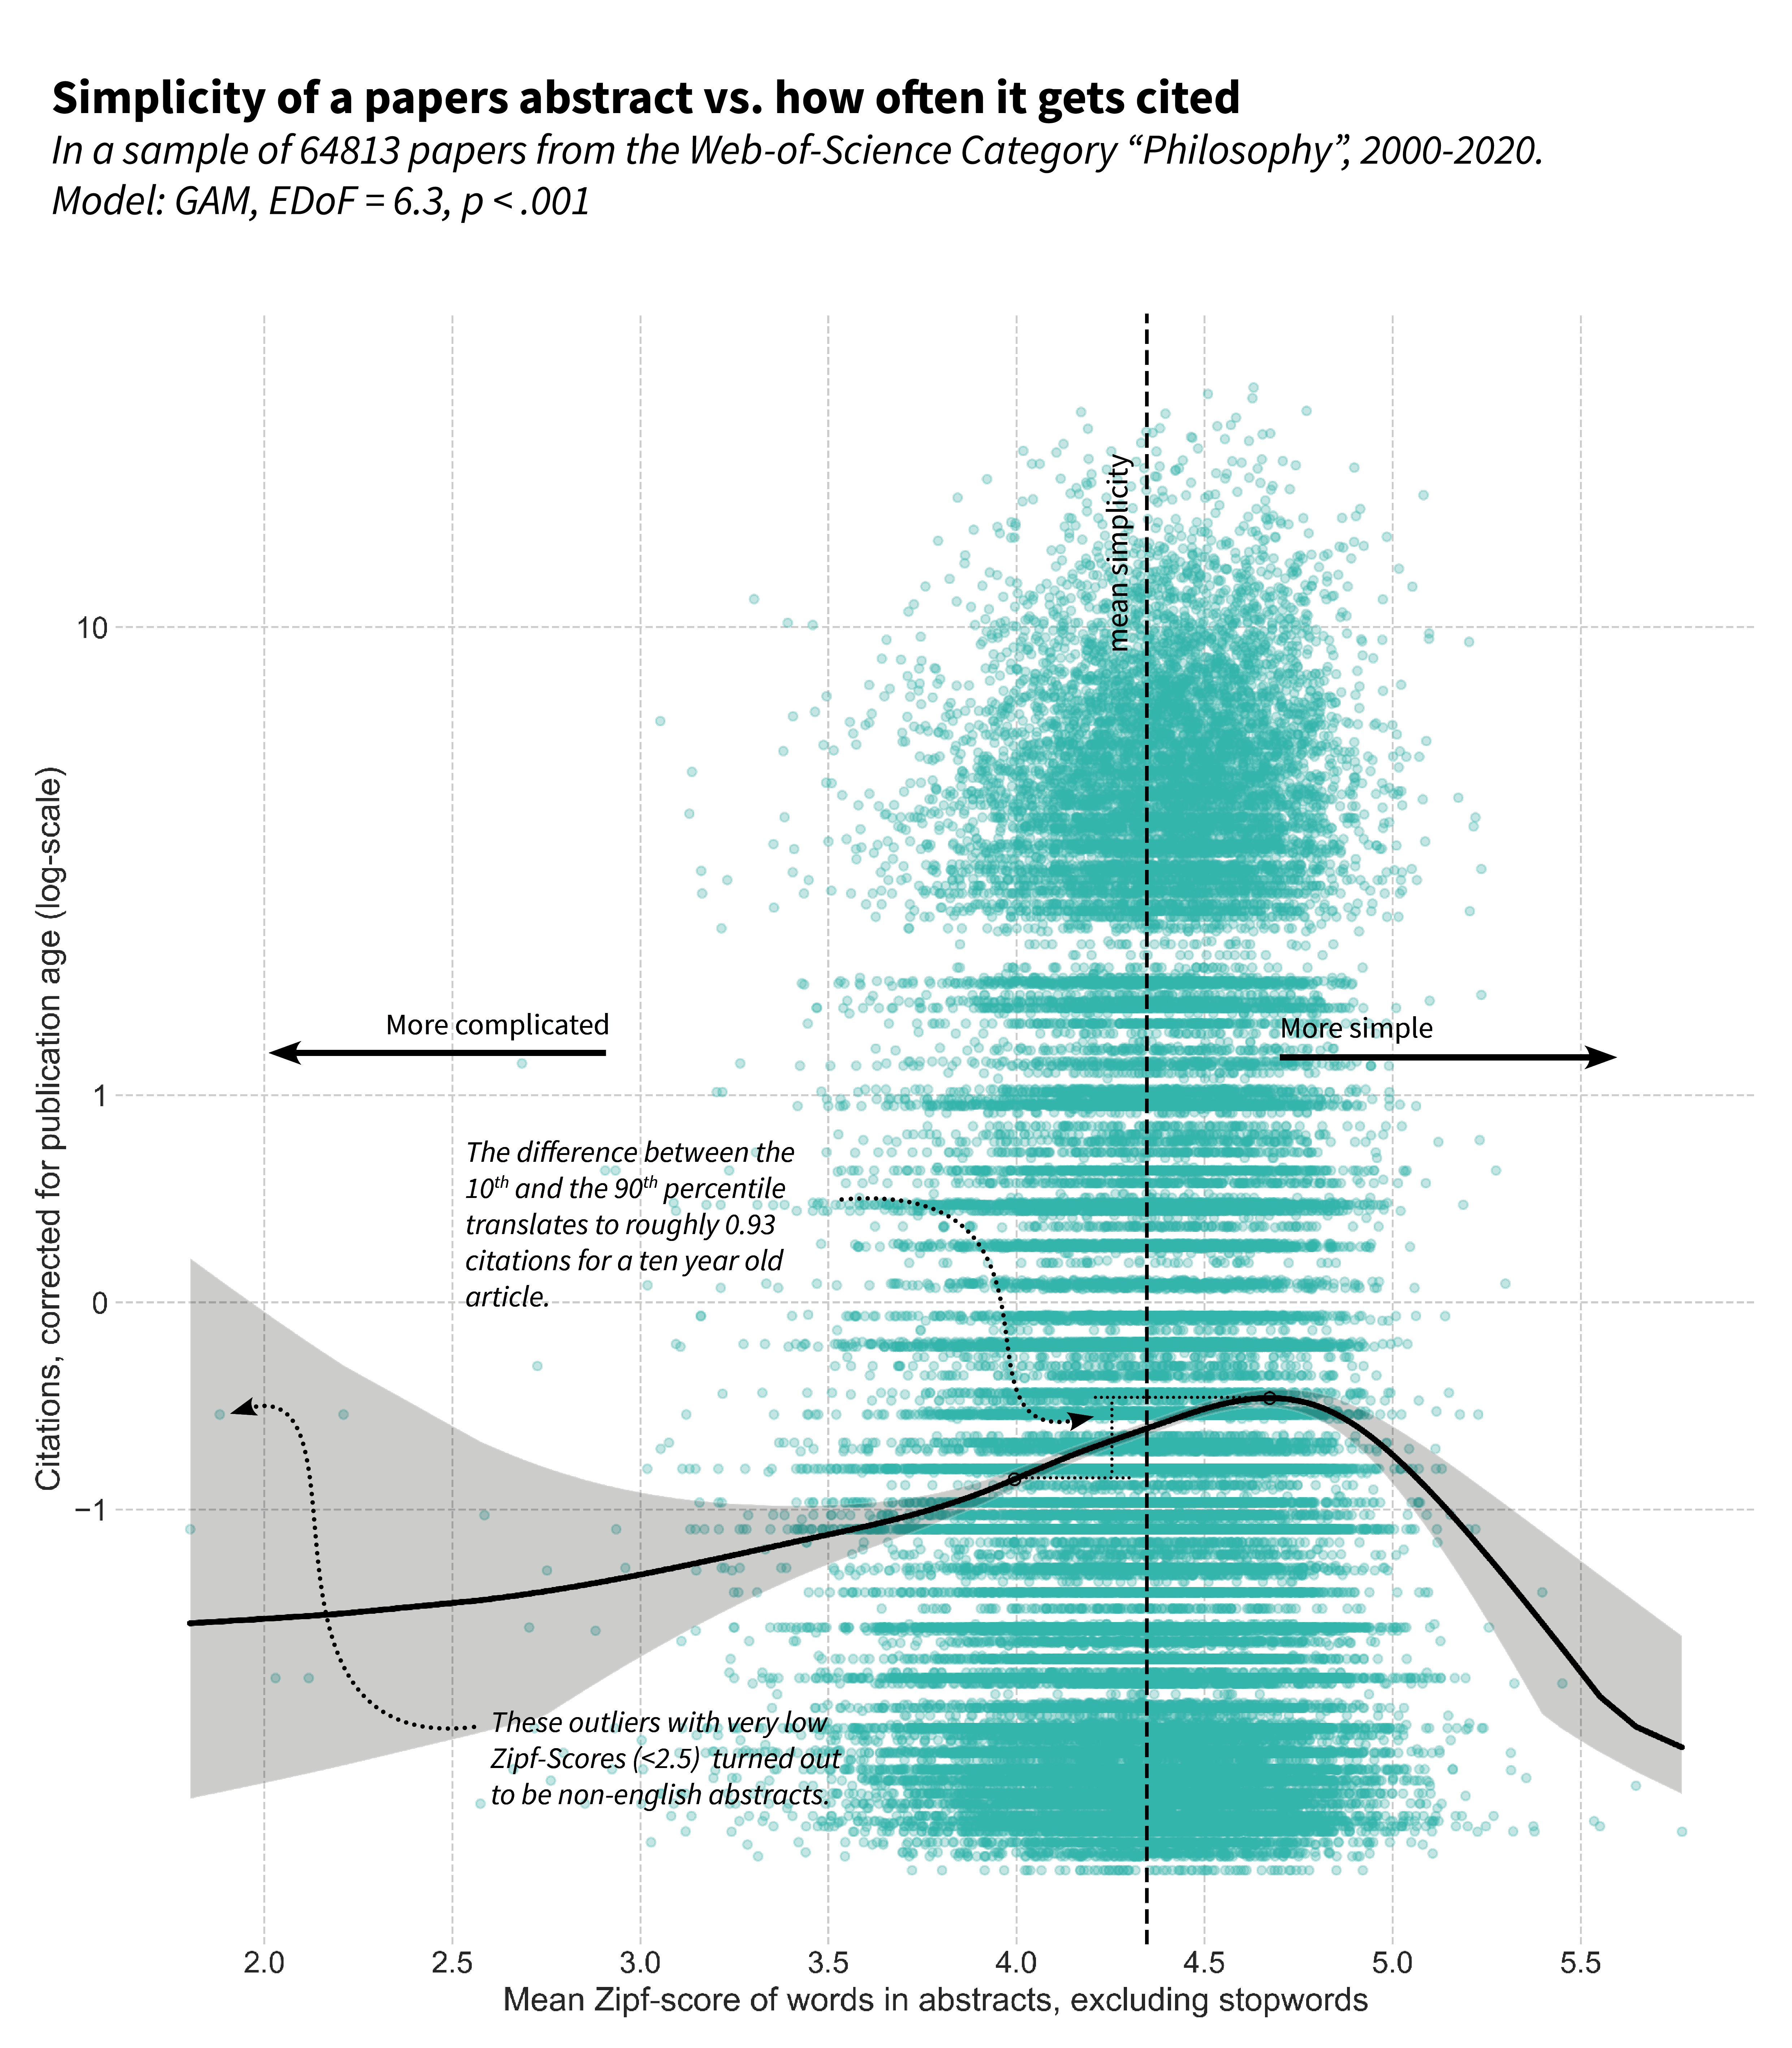 citations_vs_zipf_abstracts_labeled.png